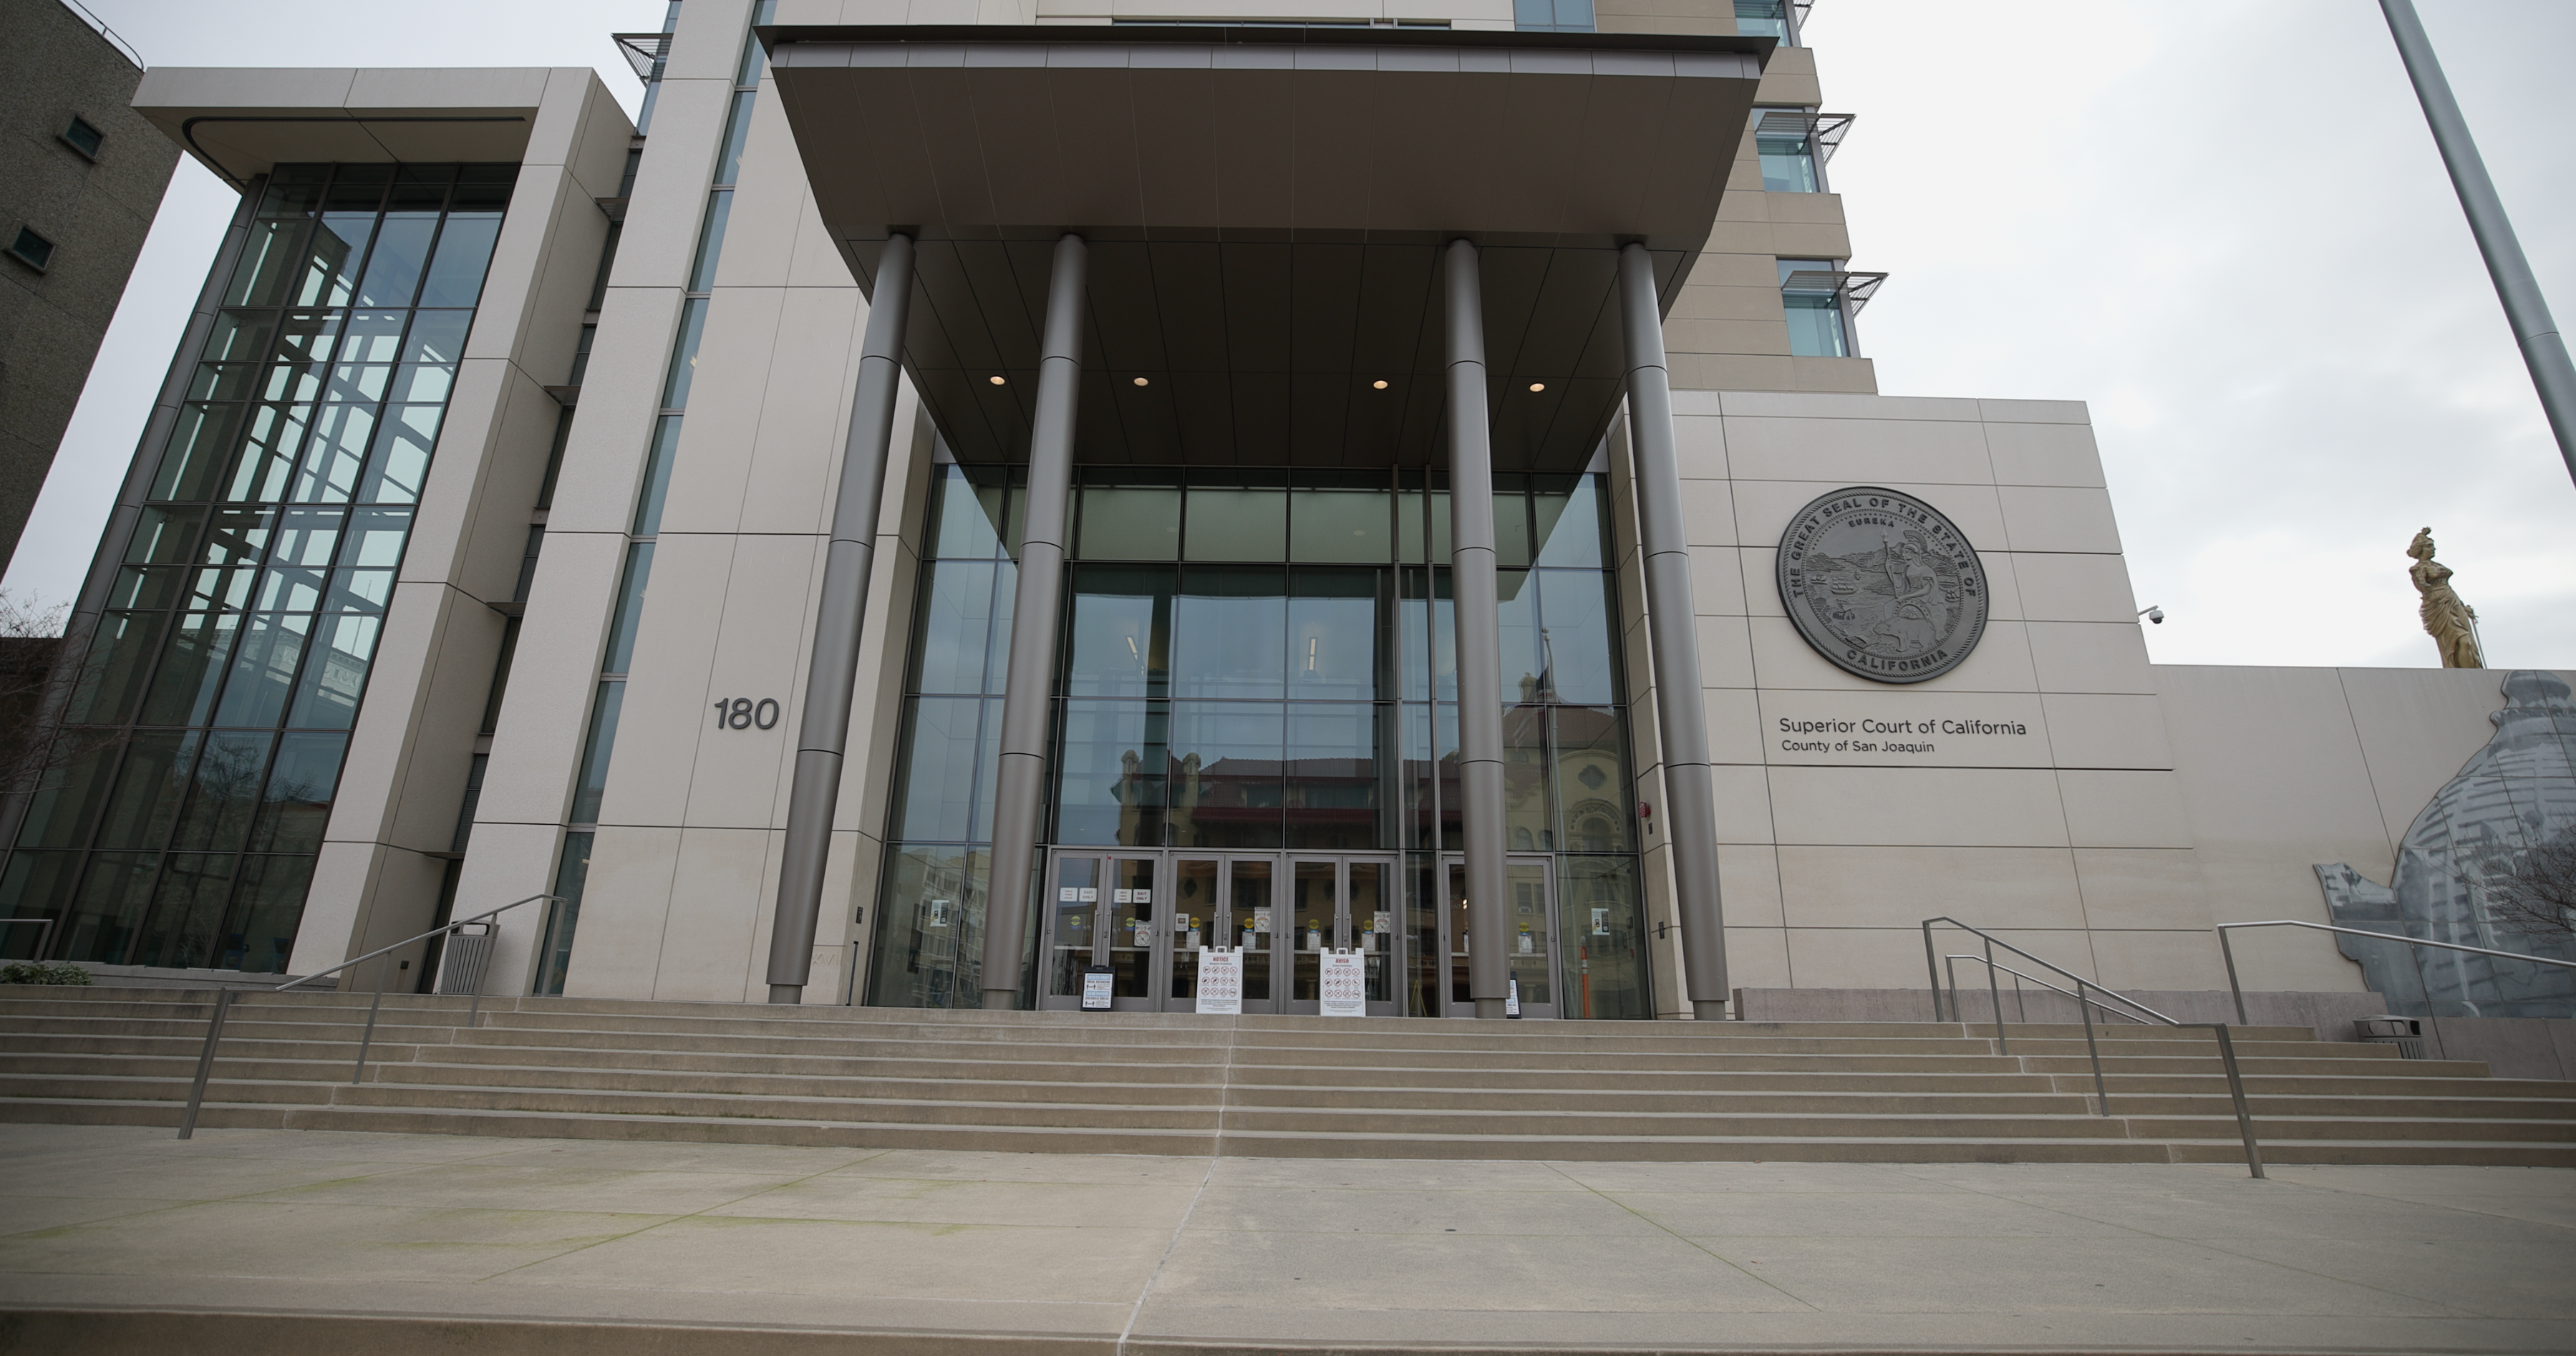  San Joaquin County Superior Court in downtown Stockton, California. The building features a large glass entrance framed by metal columns, with the court's seal prominently displayed on the wall to the right. Stairs lead up to the main doors from the street level.